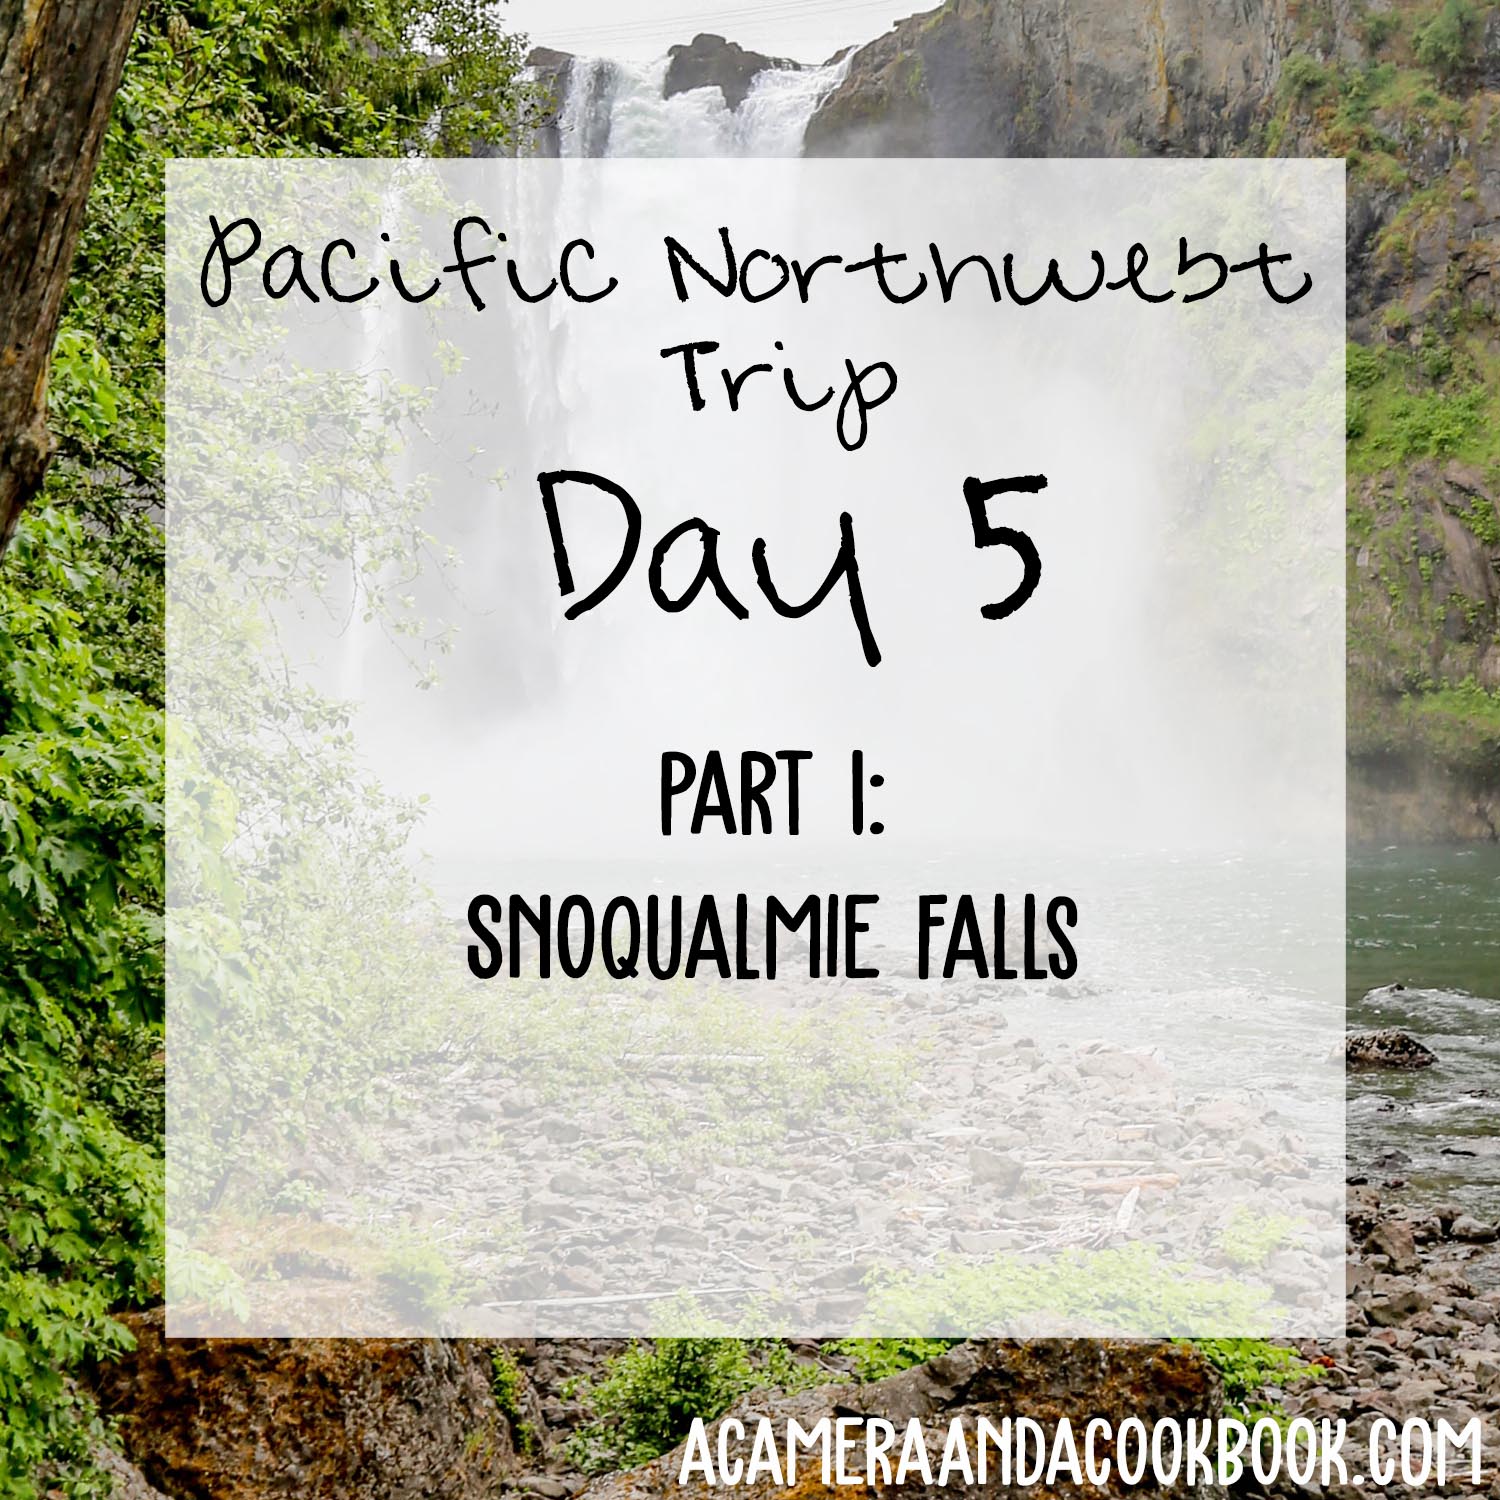 Pacific NW Trip: Day 5 - Part 1